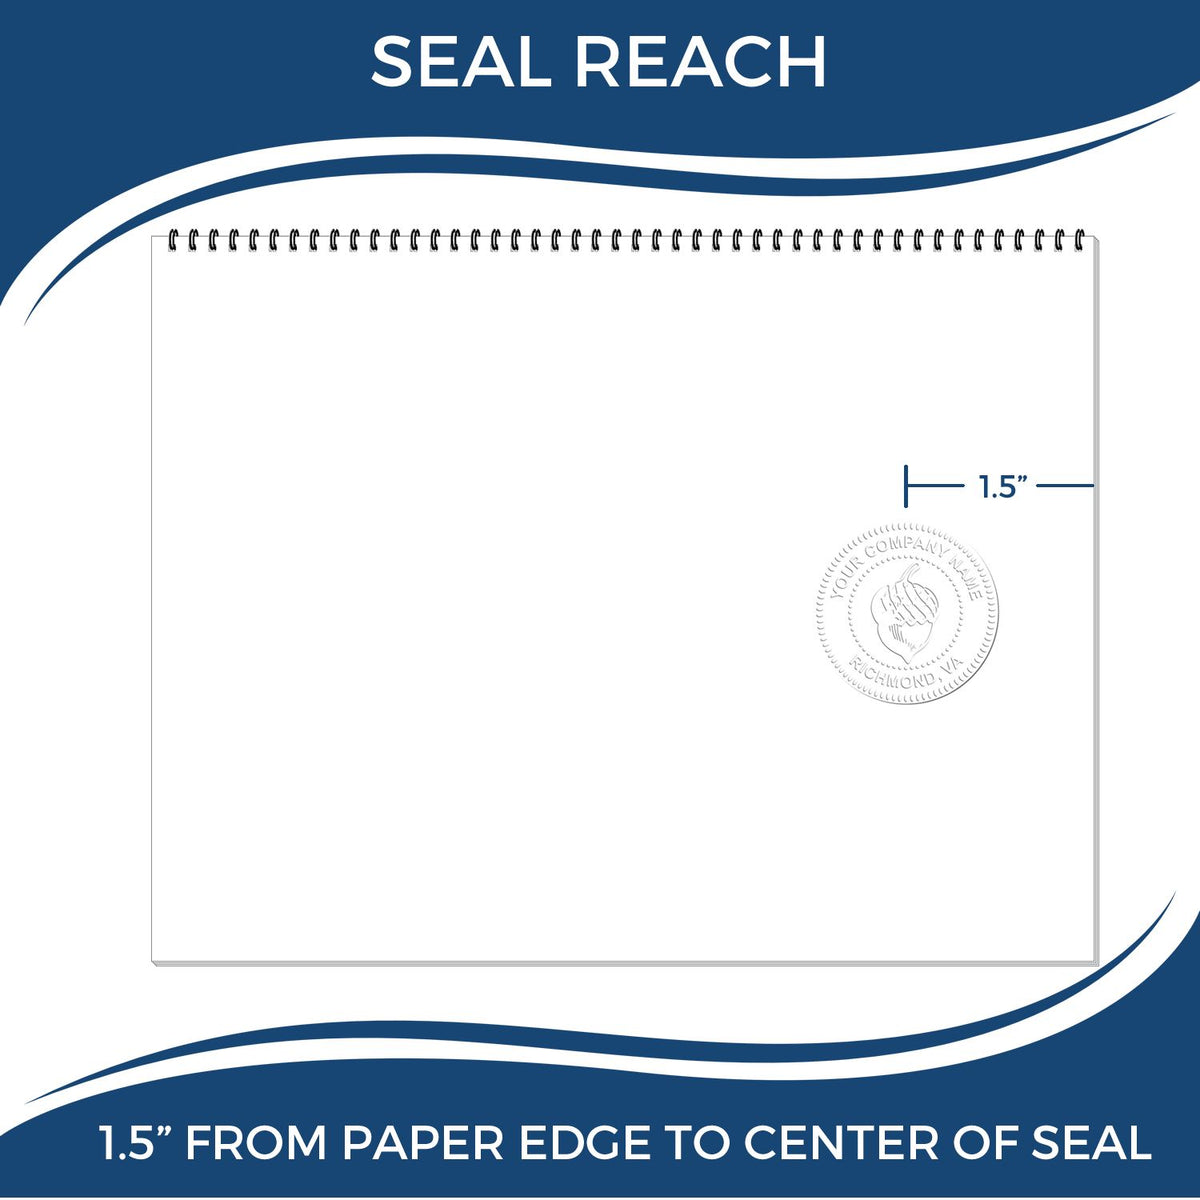 An infographic showing the seal reach which is represented by a ruler and a miniature seal image of the Handheld West Virginia Professional Engineer Embosser